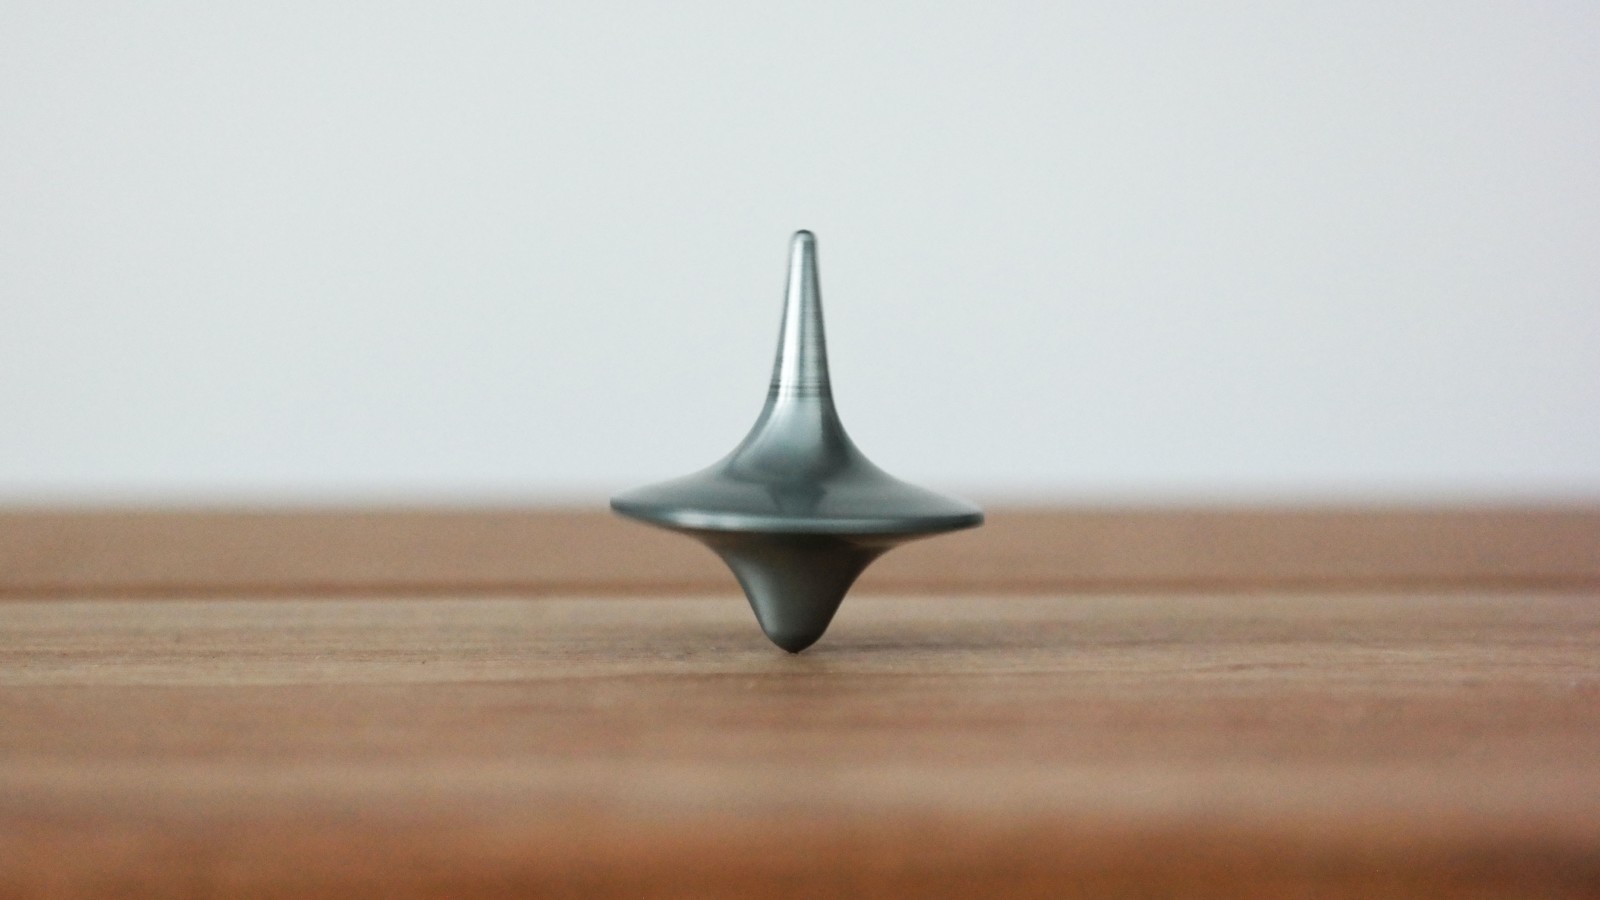 Spiing top to depict balance